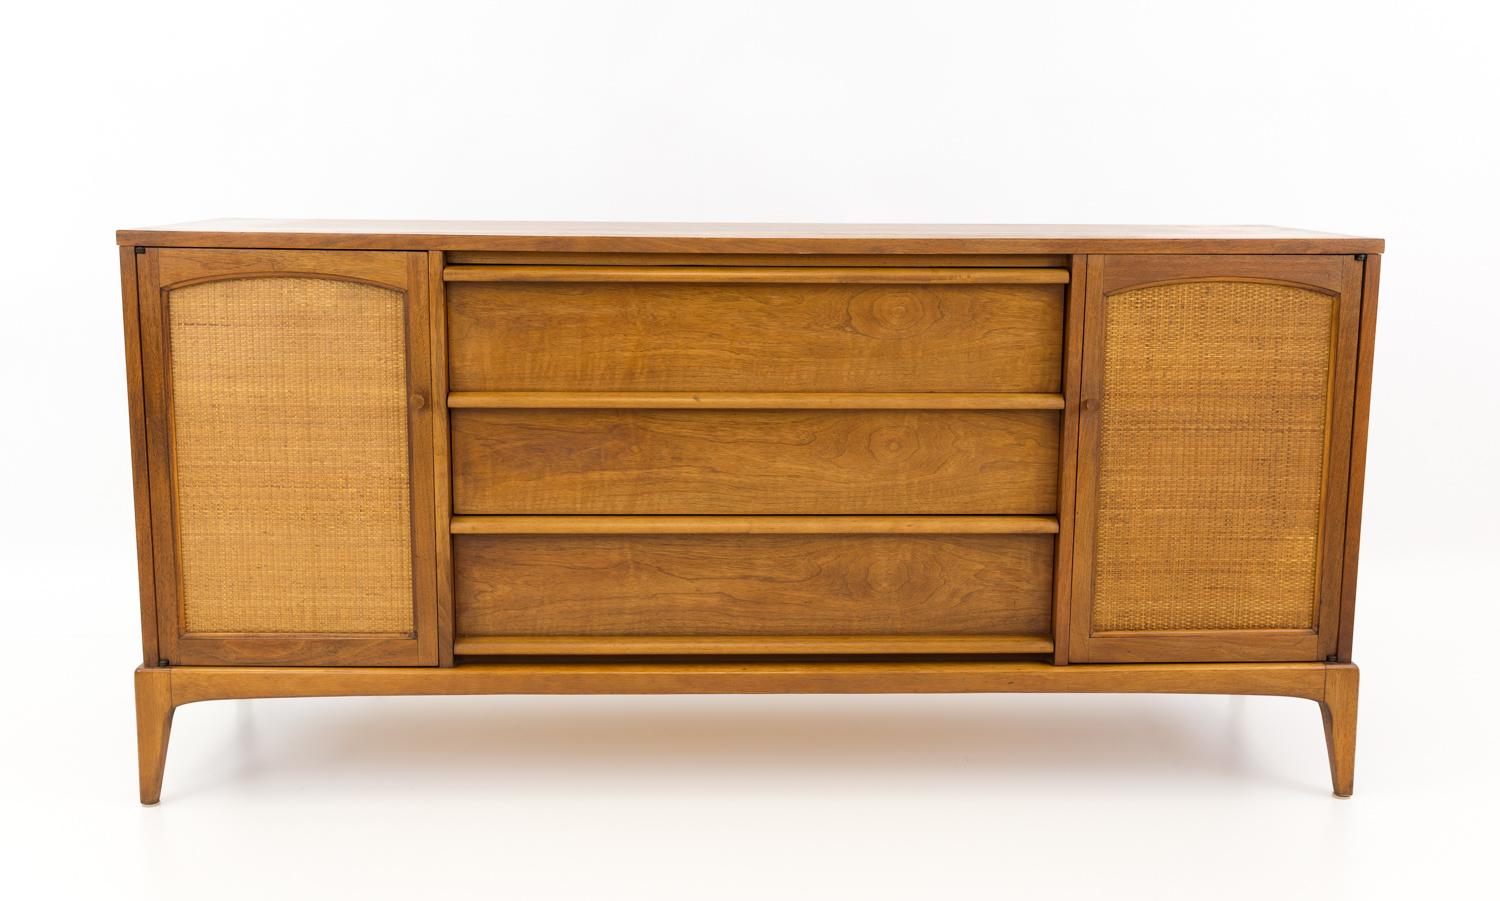 Lane rhythm mid century reversible cane door credenza.
This credenza is 66 wide x 18 deep x 31.25 inches high

All pieces of furniture can be had in what we call restored vintage condition. That means the piece is restored upon purchase so it’s